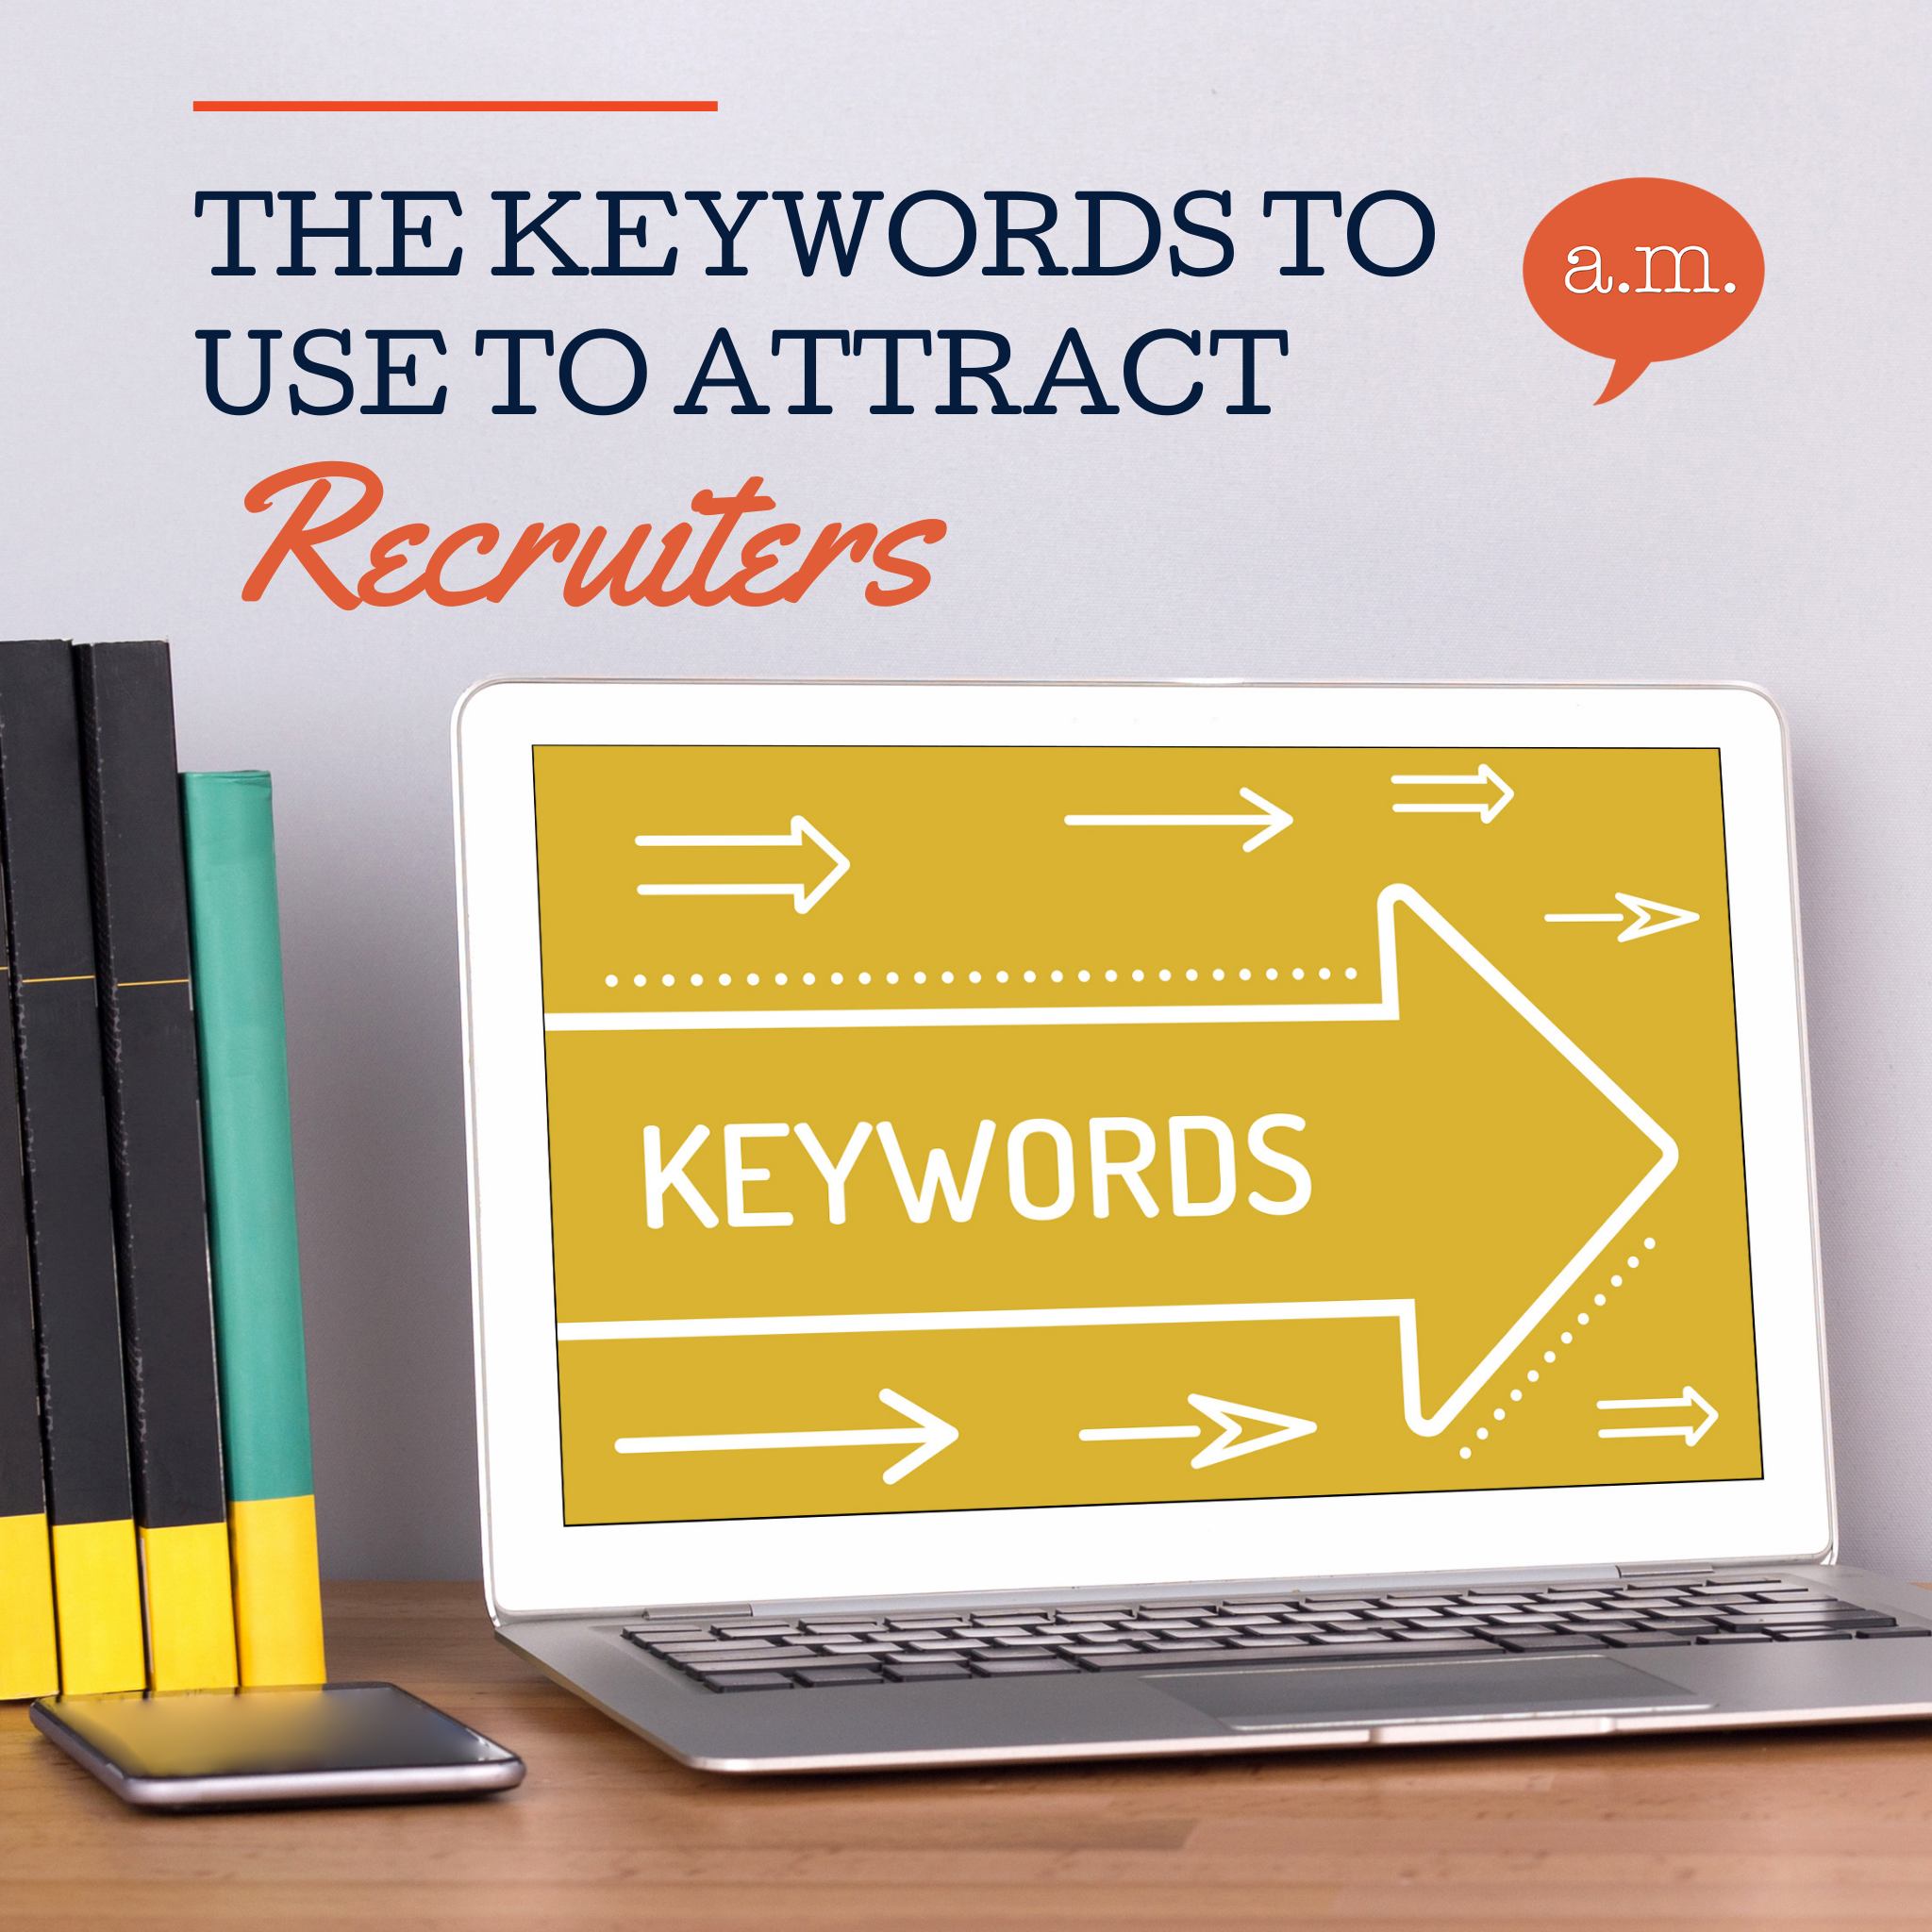 Keywords that Attract Recruiters